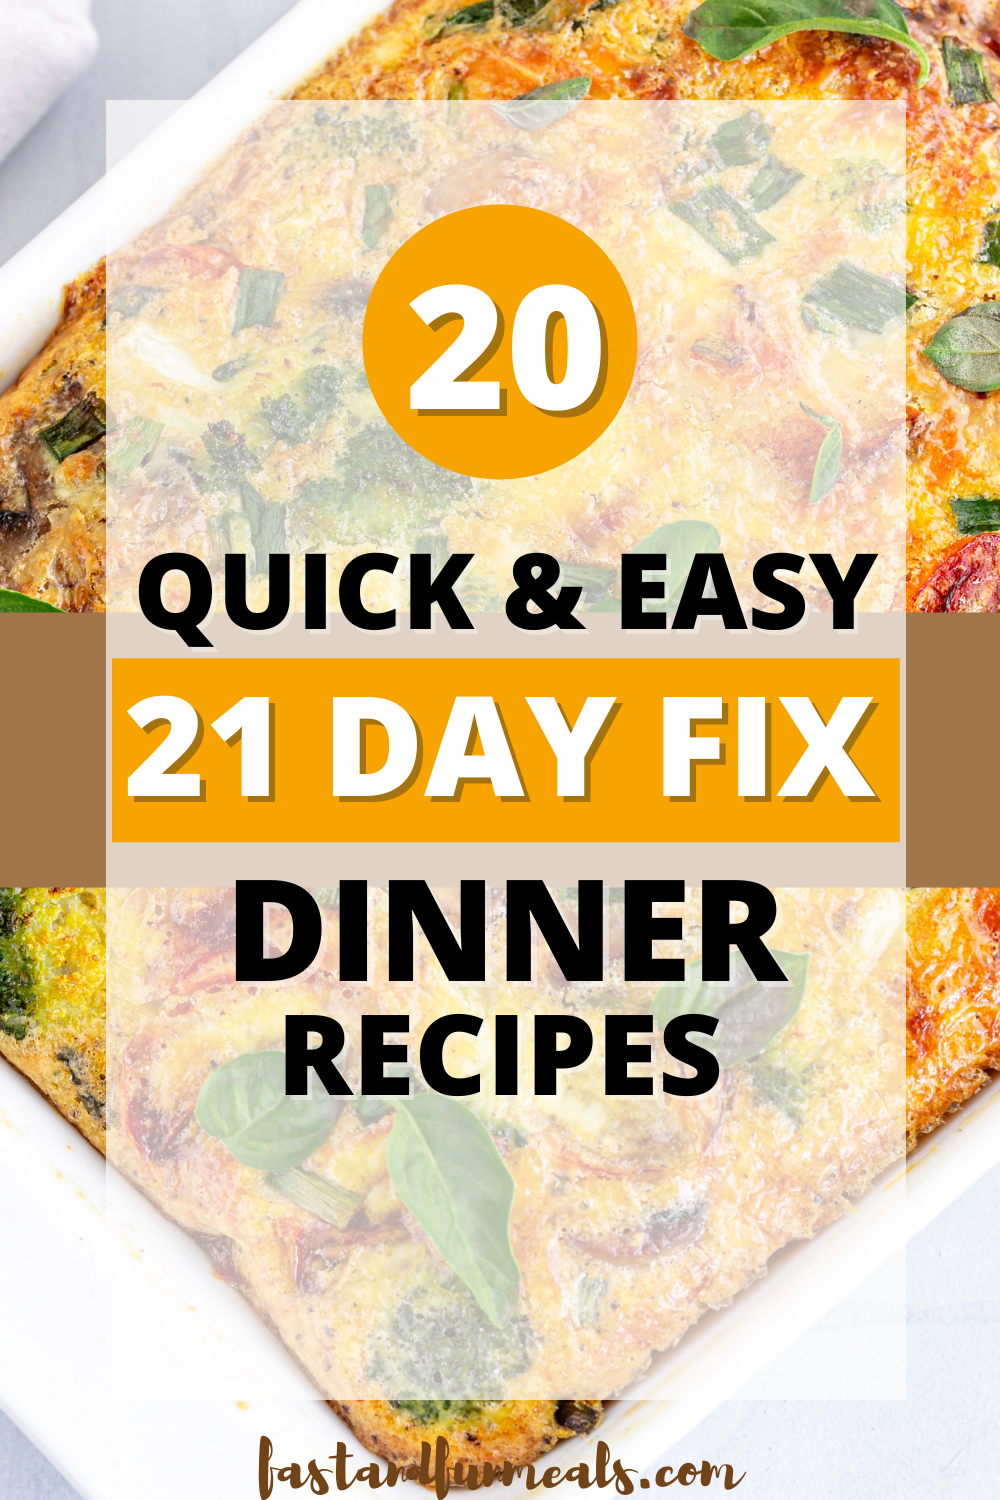 Pin showing the title 20 Quick and Easy 21 Day Fix Dinner Ideas